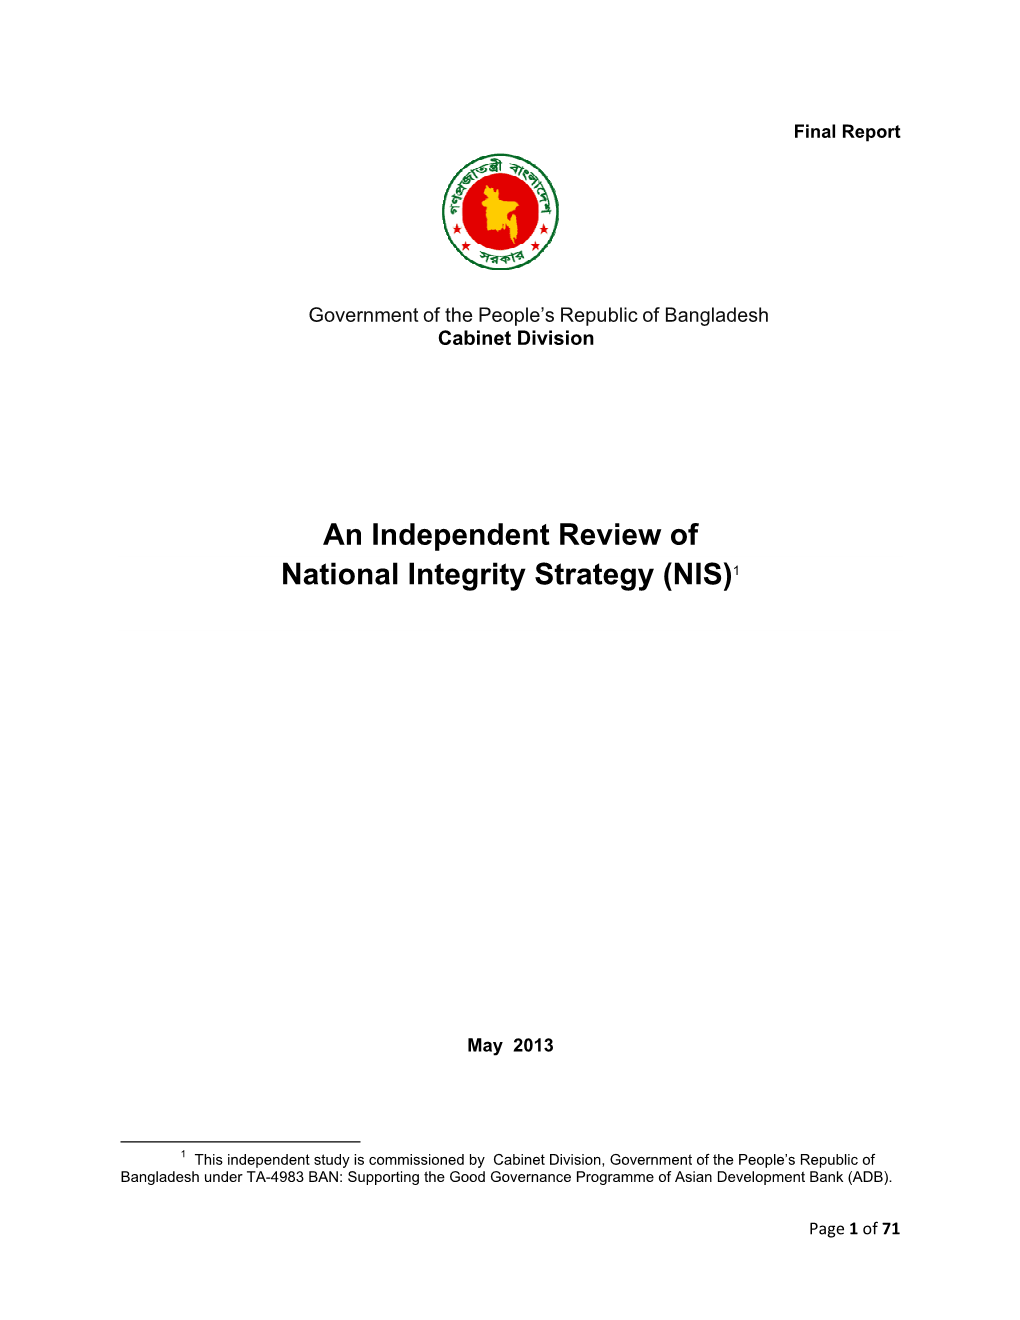 An Independent Review of National Integrity Strategy (NIS)1